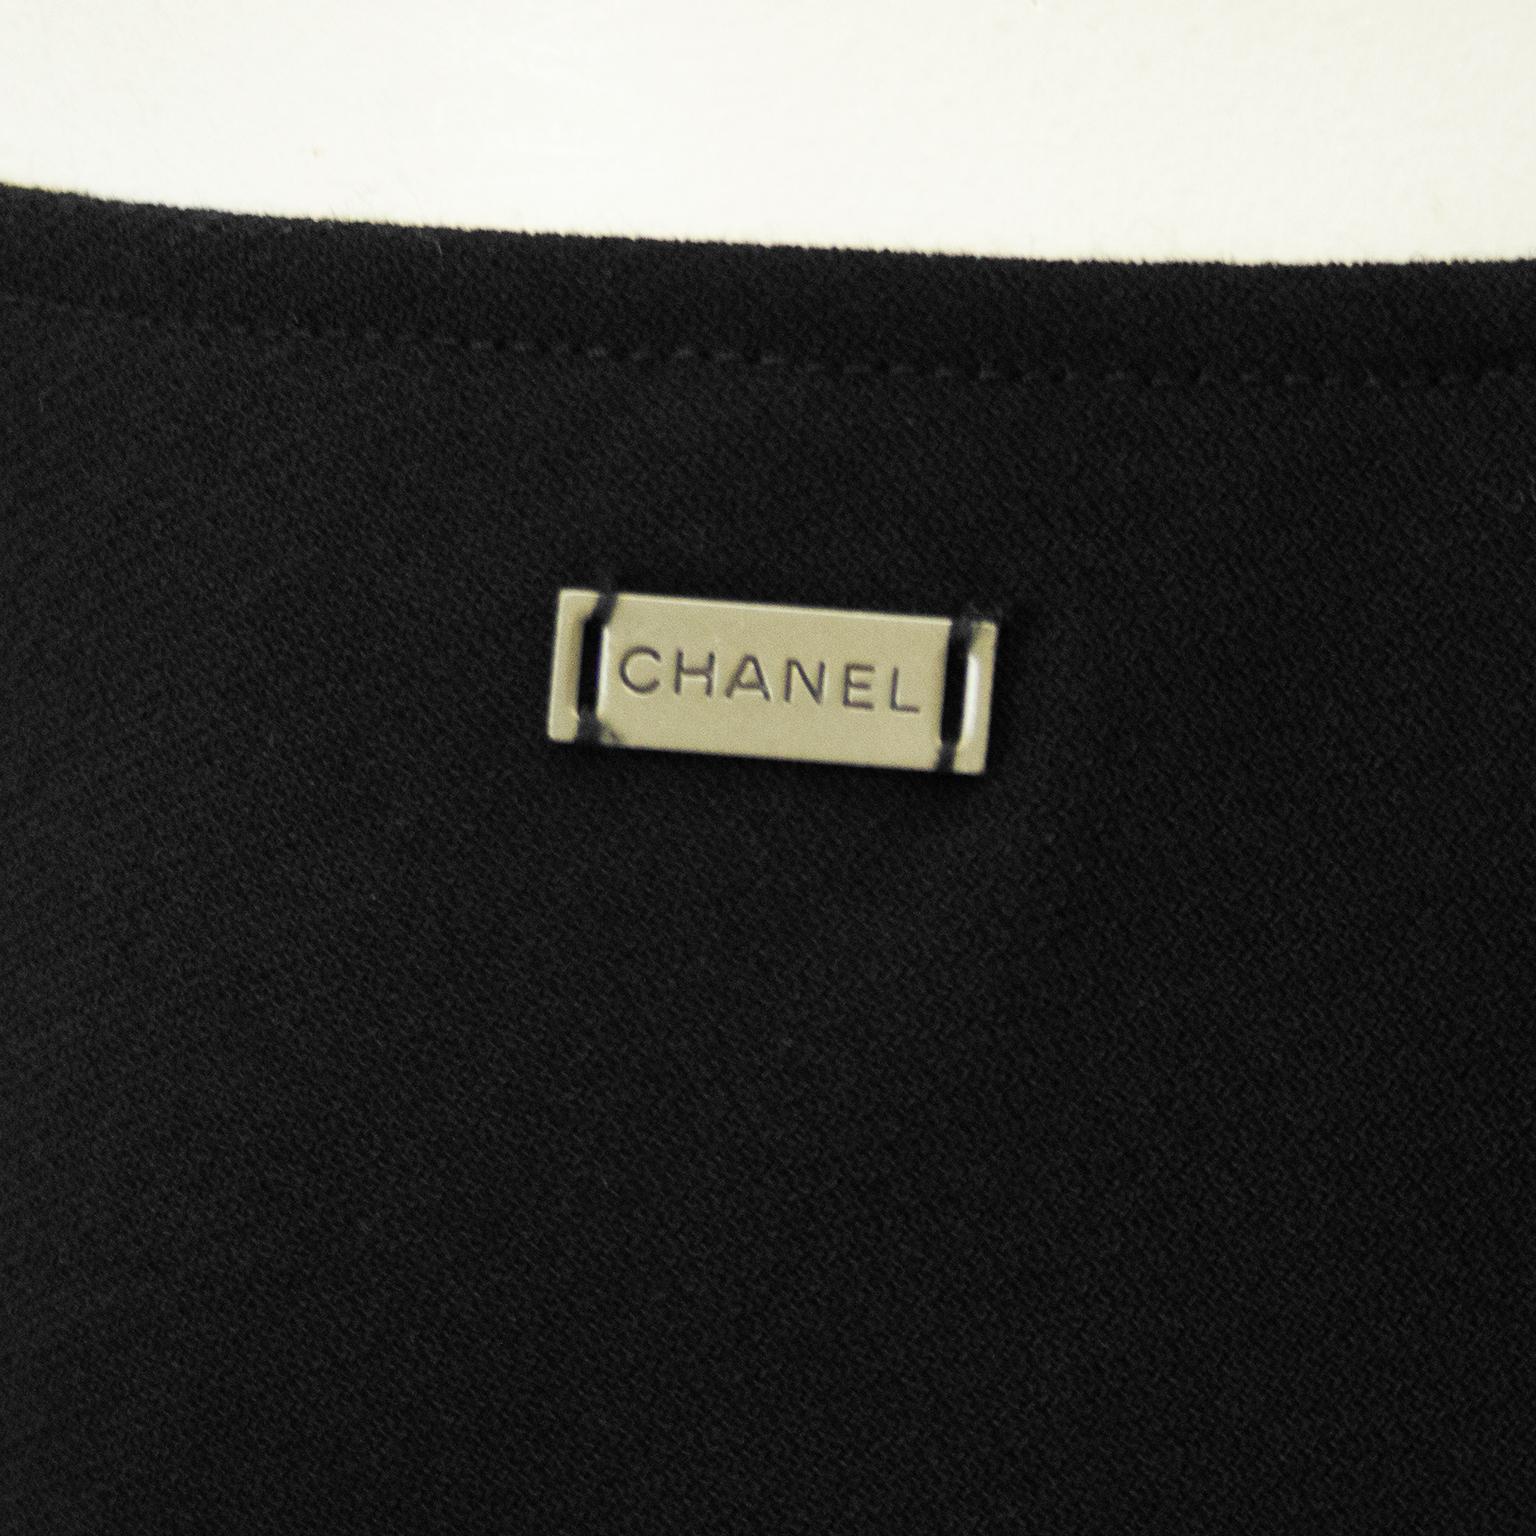 2000 Chanel Black Skirt Suit  In Good Condition For Sale In Toronto, Ontario